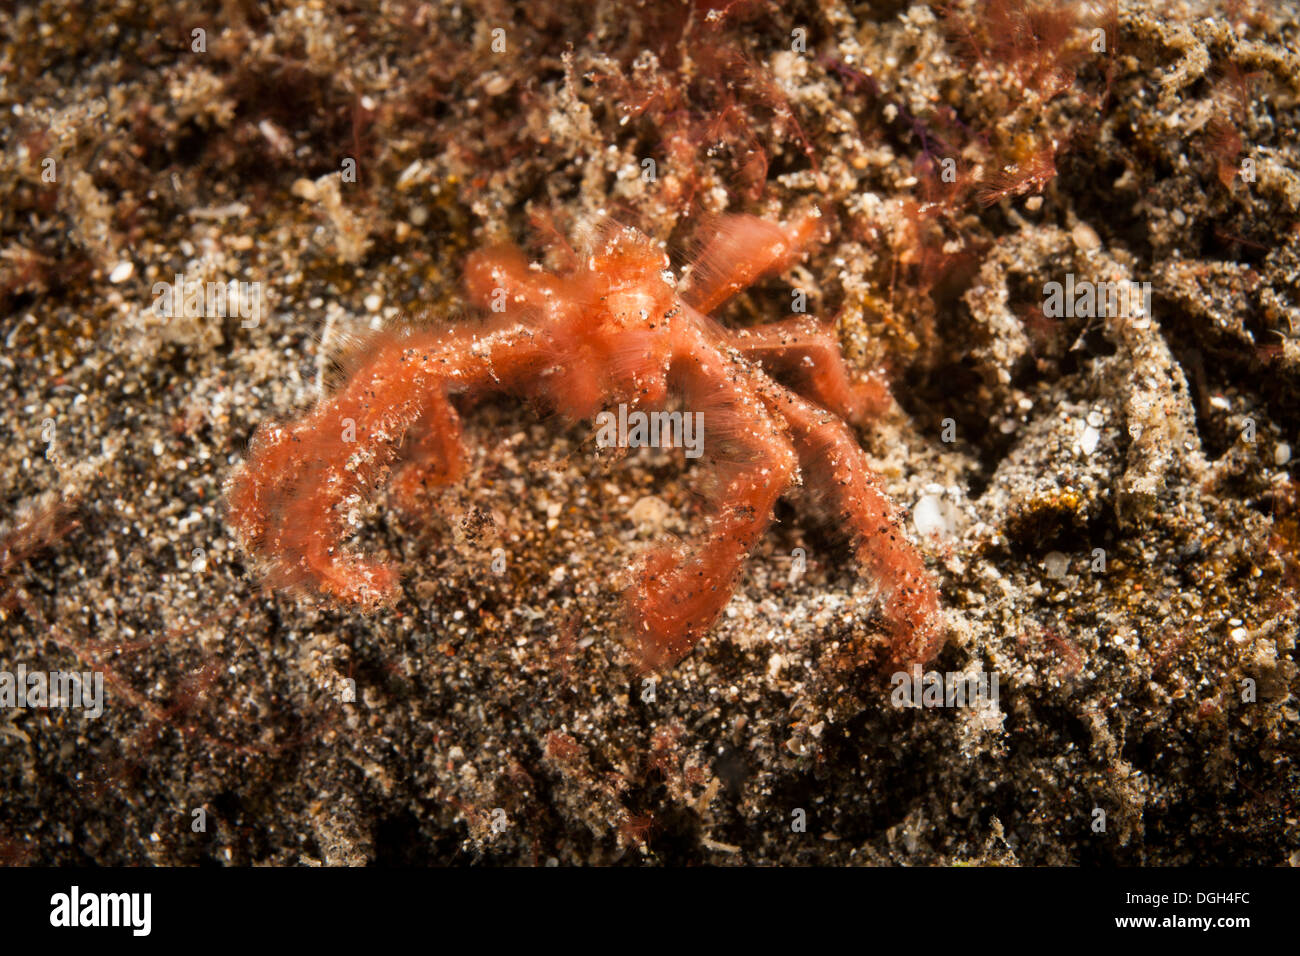 Orangutan Crab (Oncinopus sp.) in threat display in the Lembeh Strait off North Sulawesi, Indonesia. Stock Photo